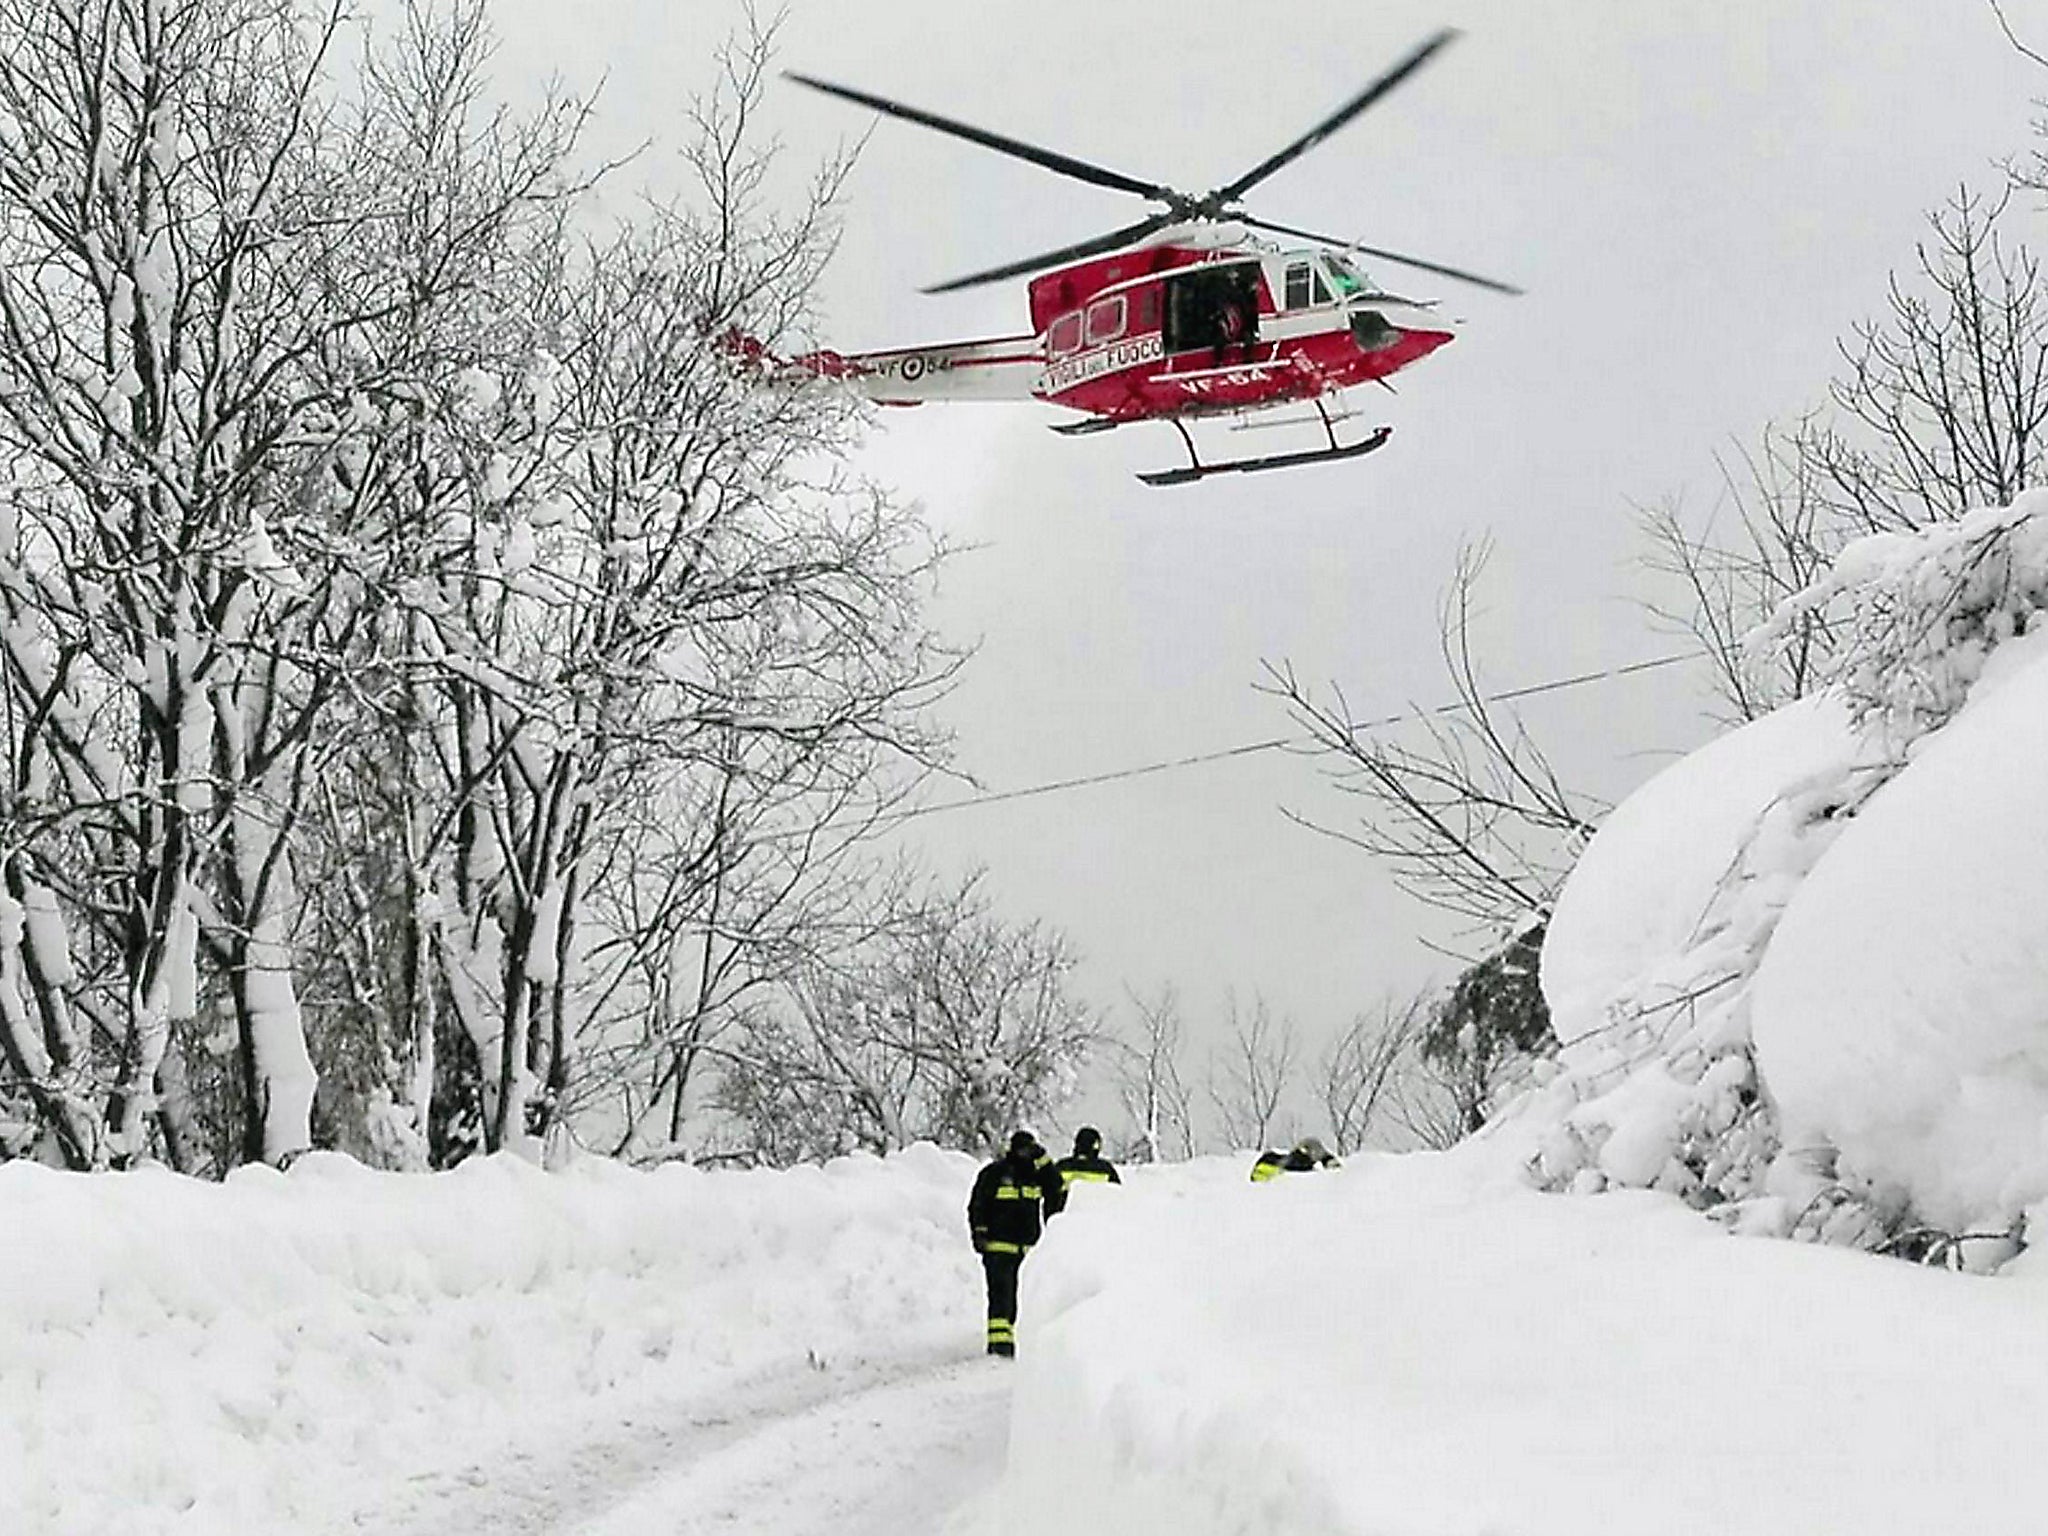 Nine people have been pulled from the wreckage of the hotel which was buried by an avalanche